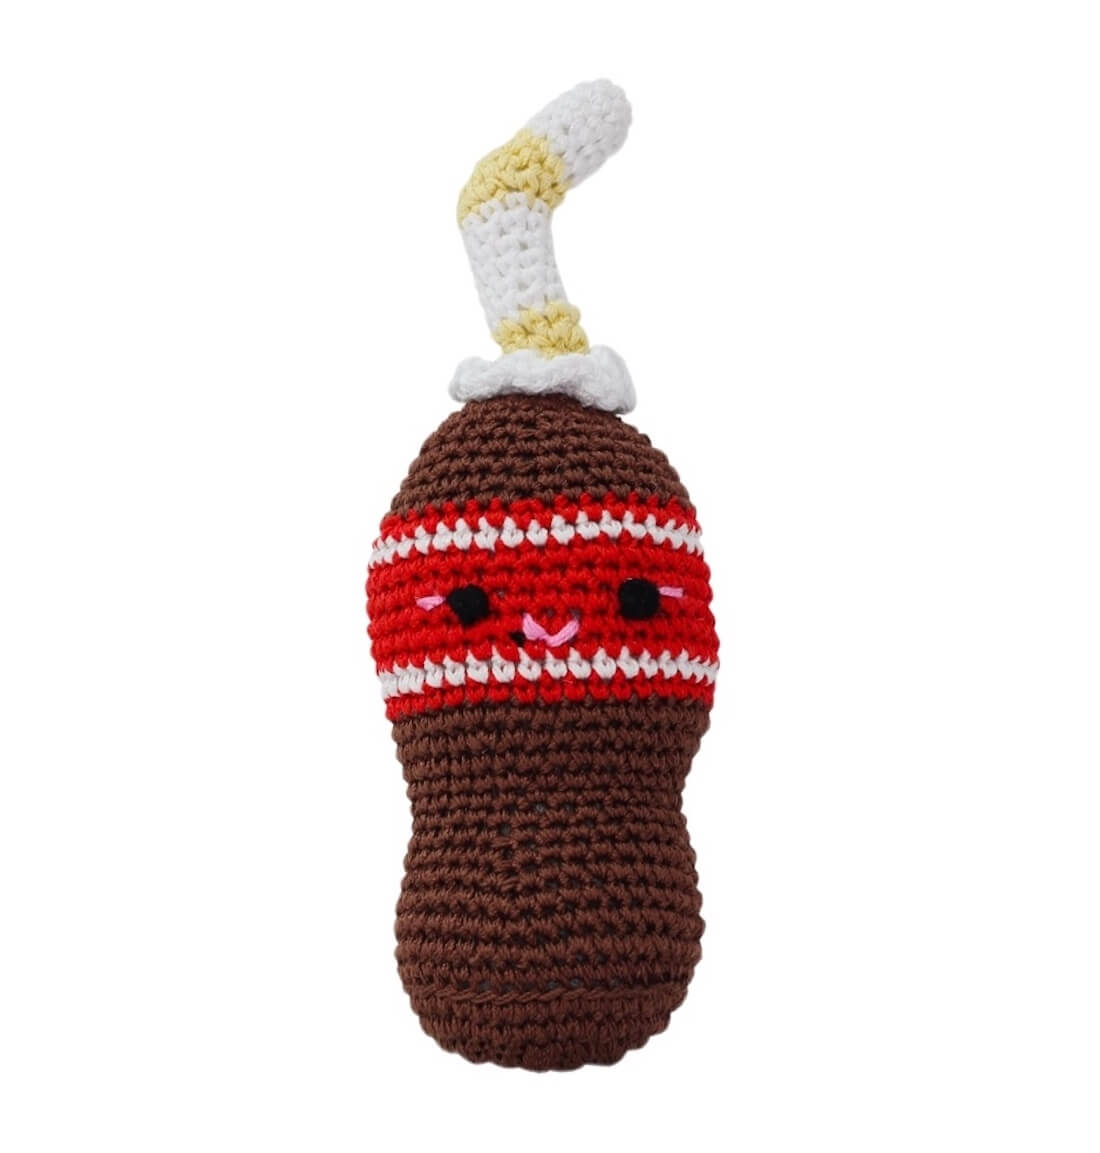 Knit Knacks &quot;Soda Pop Bottle&quot; handmade organic cotton dog toy. Anthropomorphic cola bottle with a smiling face. Has a horizontal red stripe and a white straw coming out of its head.